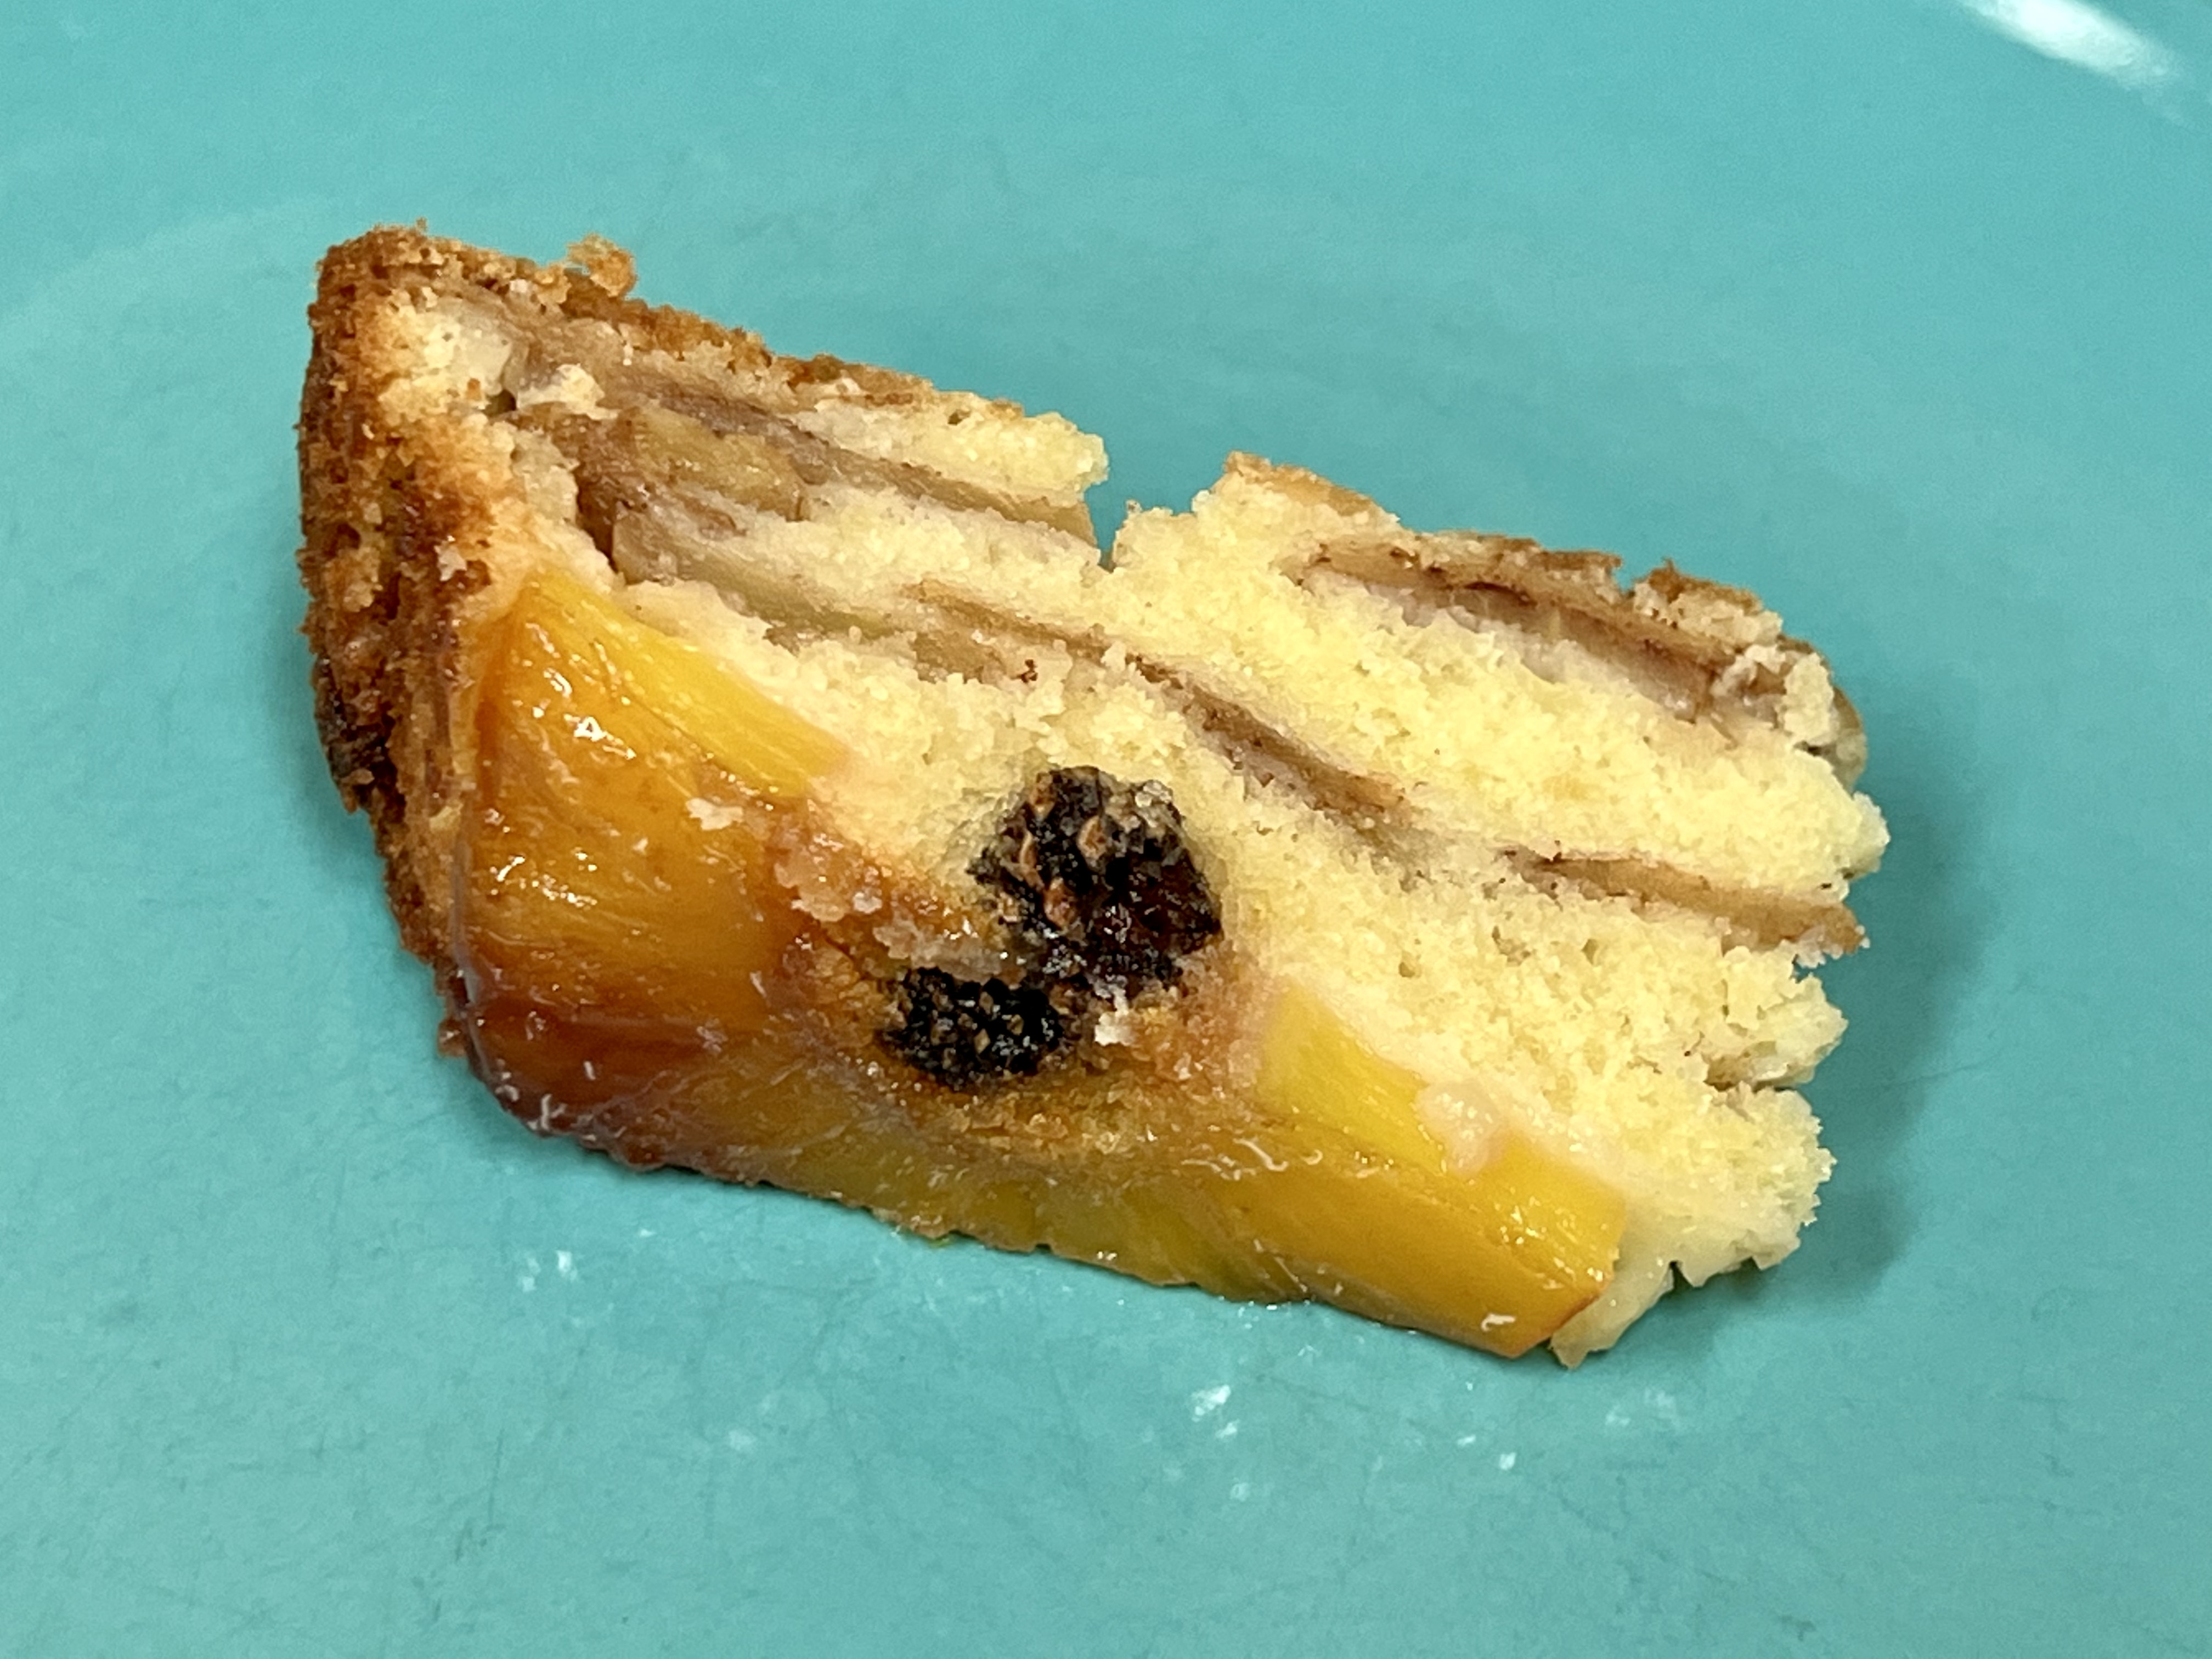 A slice of pineapple upside-down cake with a small pine cone in the pineapple ring and apple slices inside the cake.